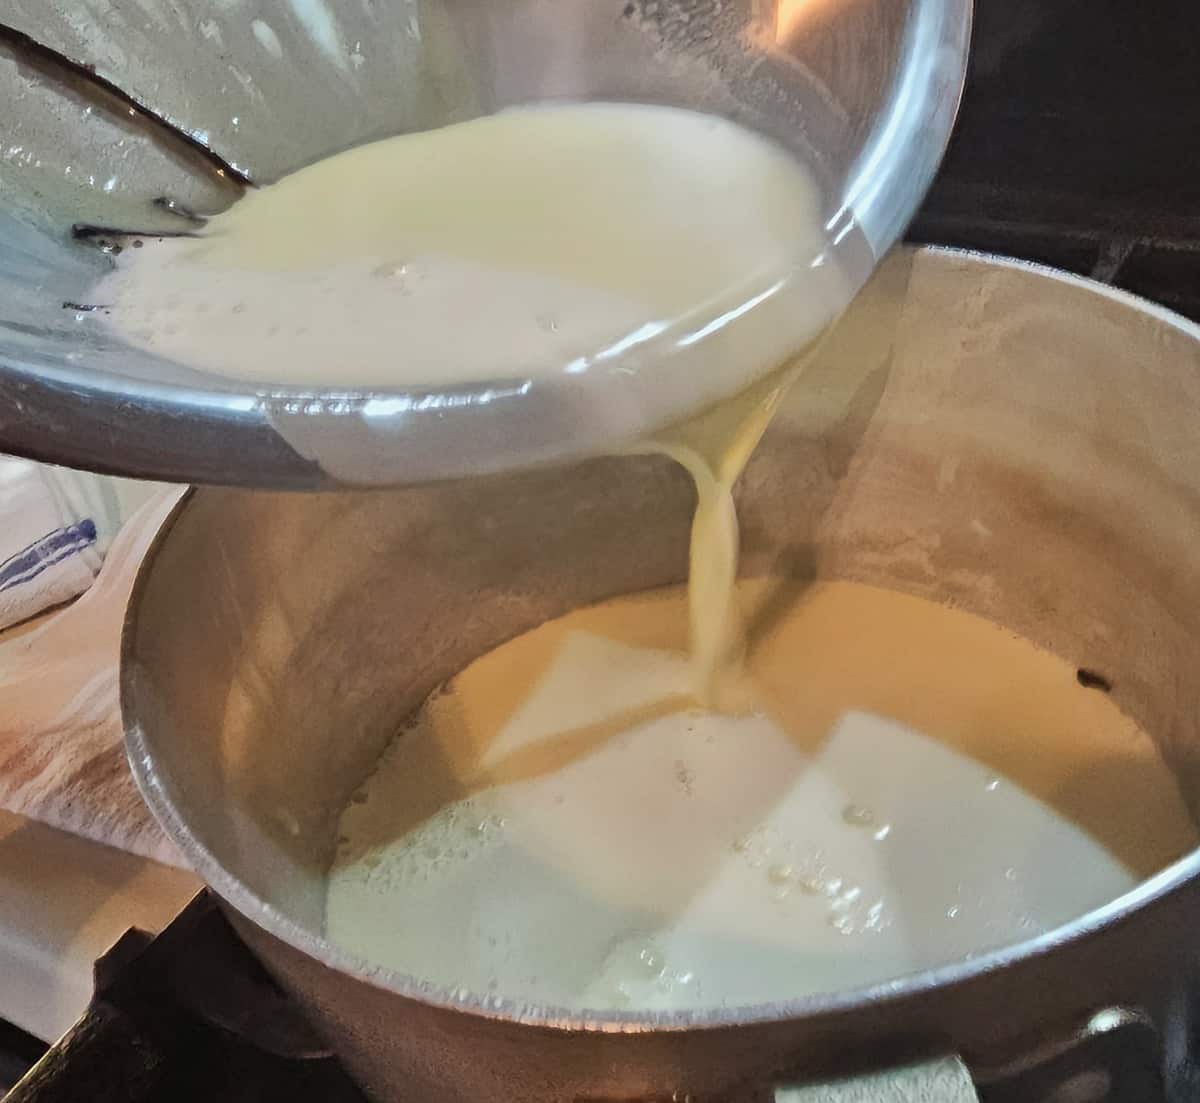 cream being poured from a mixing bowl into a saucepan